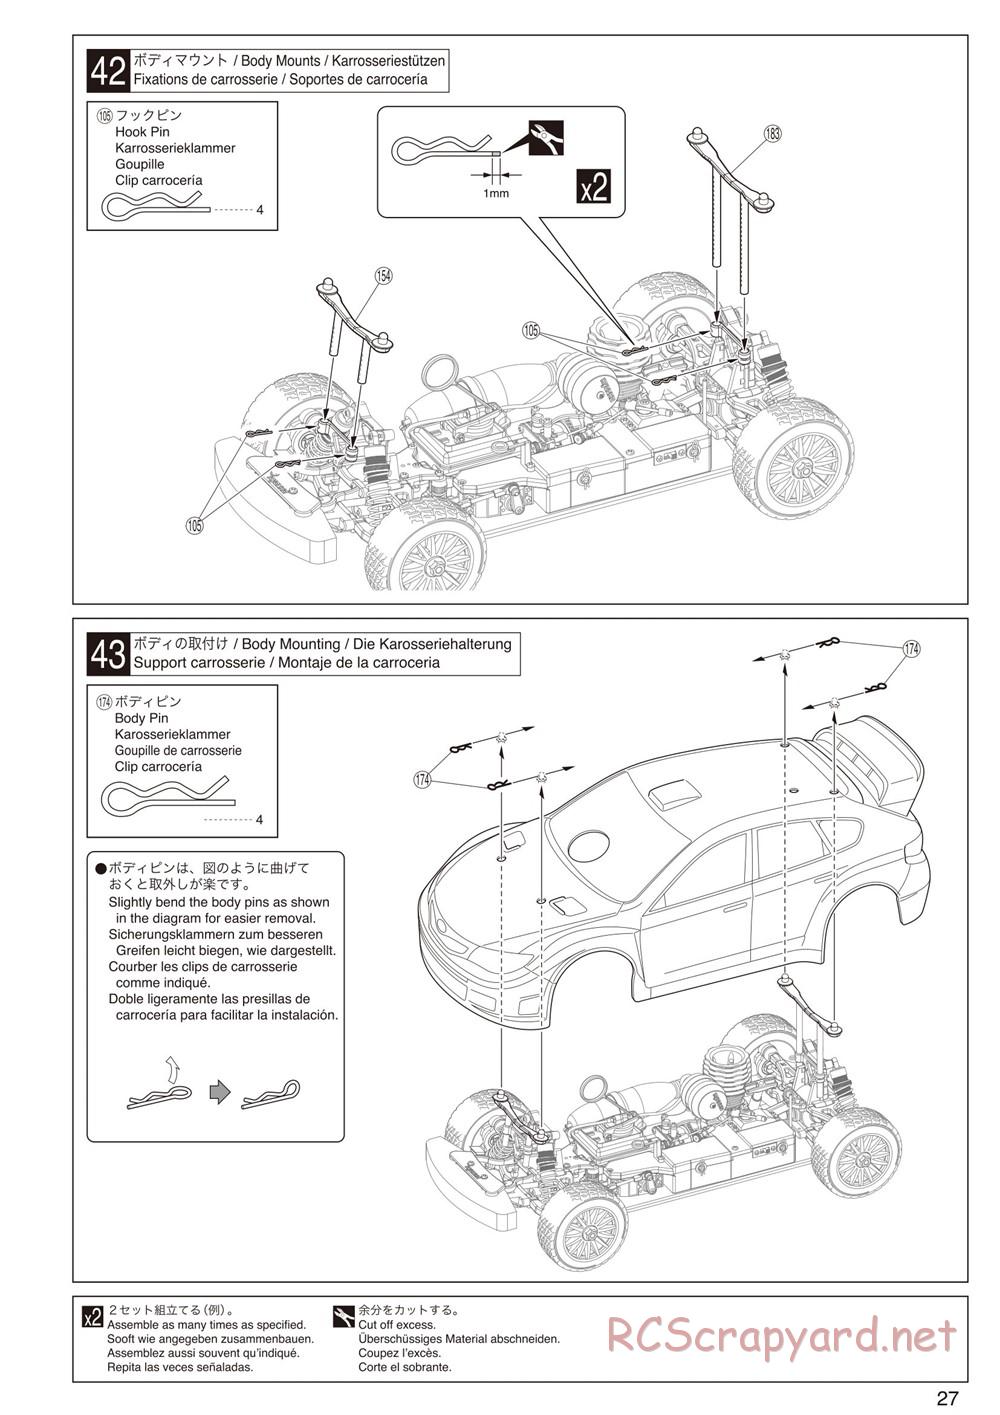 Kyosho - DRX - Manual - Page 27